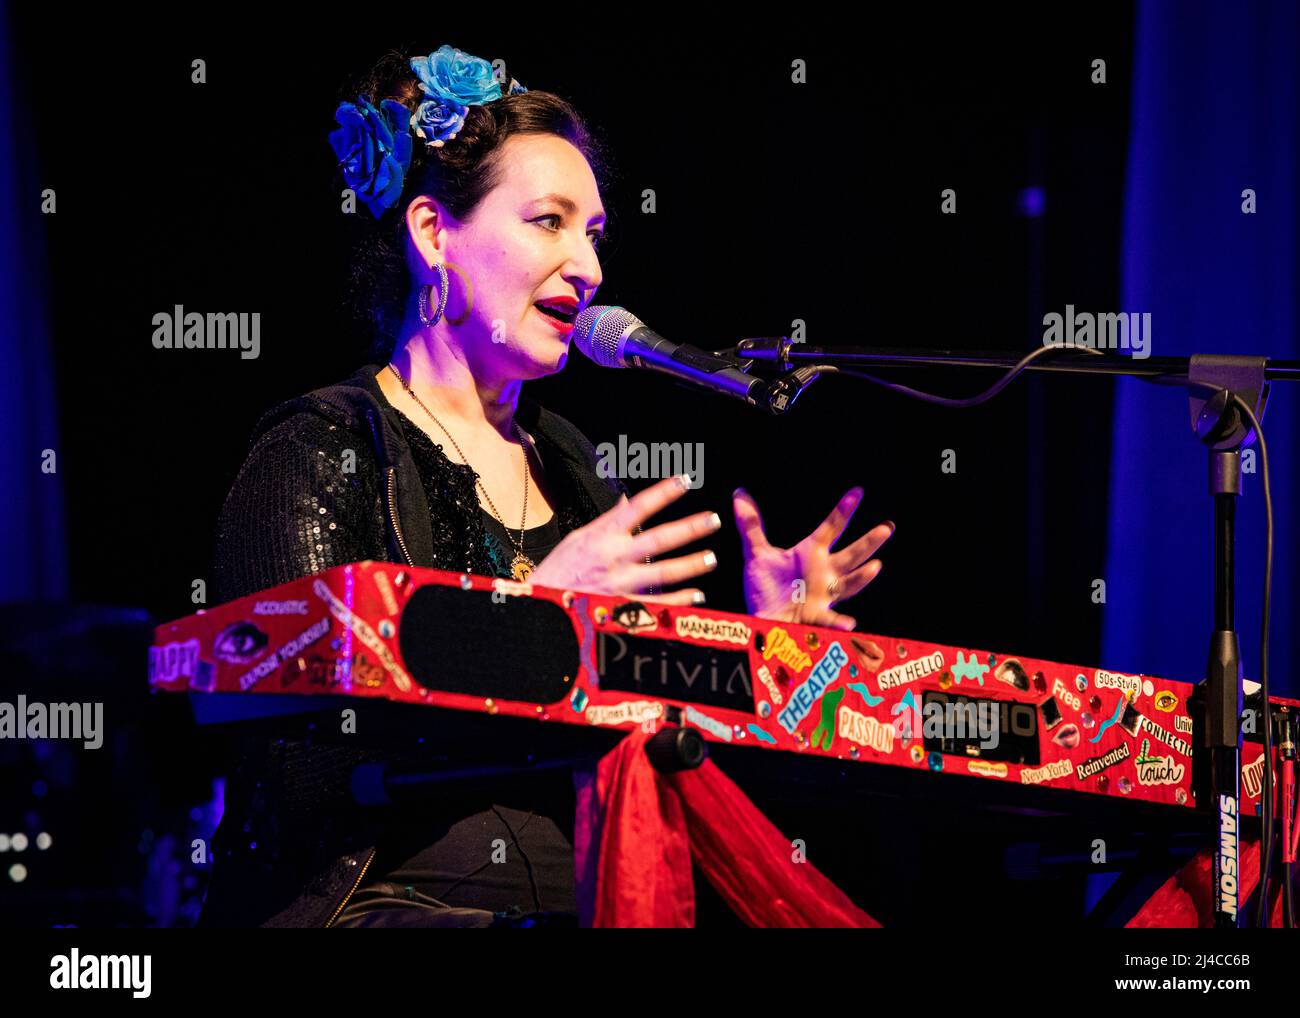 Rachael Sage, Imelda May Tour Support, Made to Love Tour, Cliffs